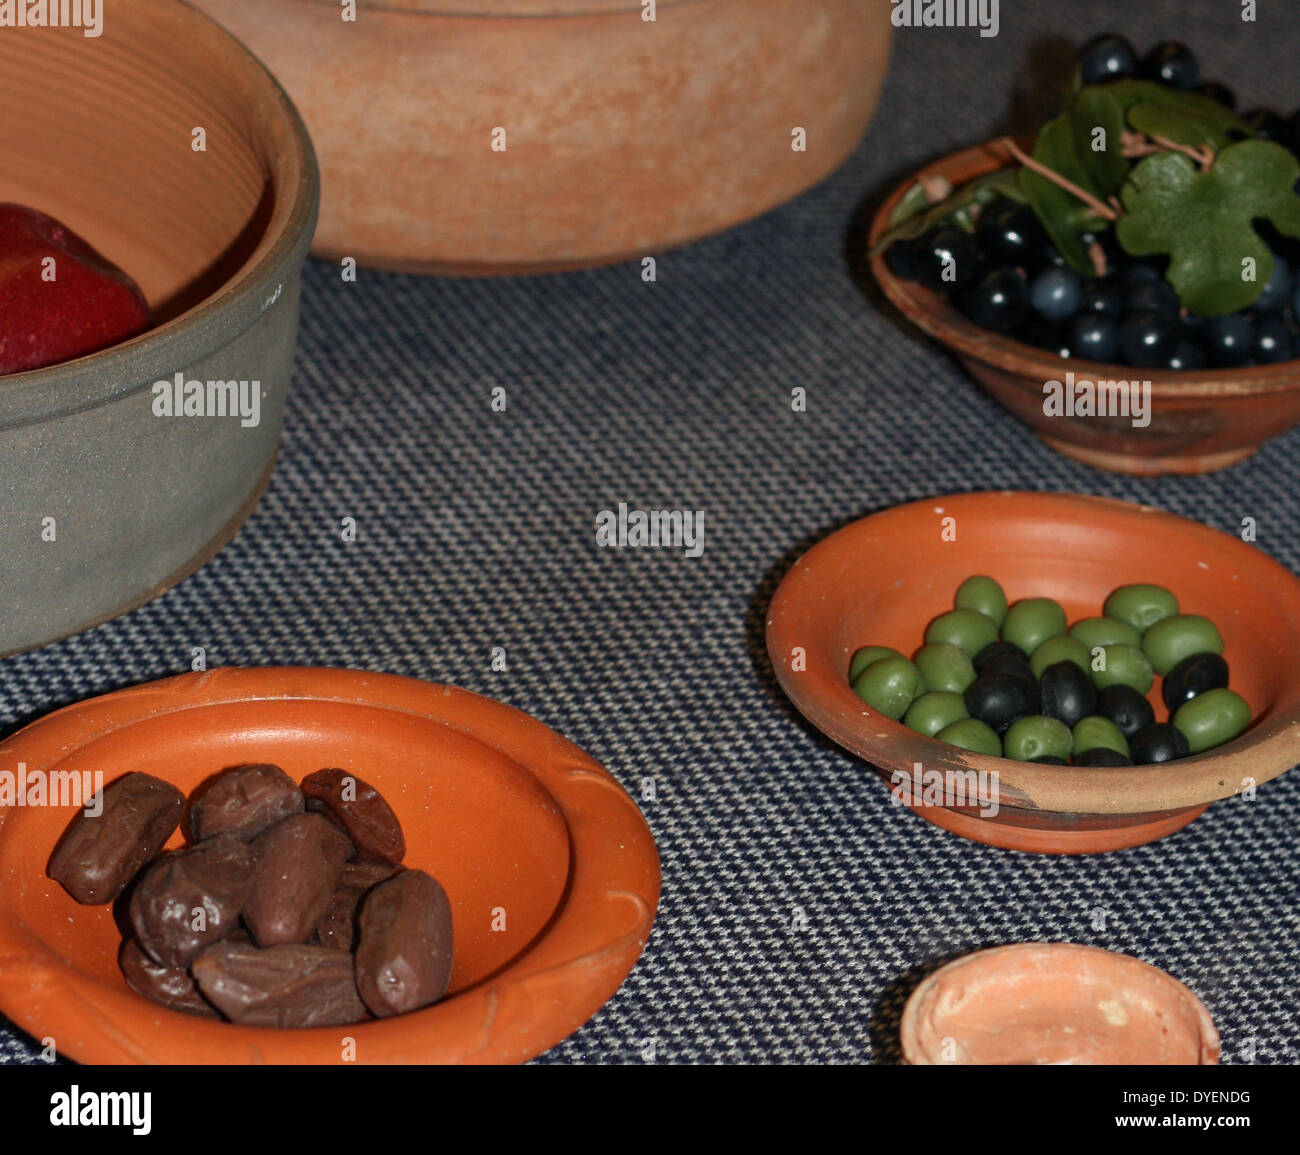 Models depicting typical Roman food from the early part of the Roman Empire. Nuts, grapes and olives are shown in simple clay dishes Stock Photo